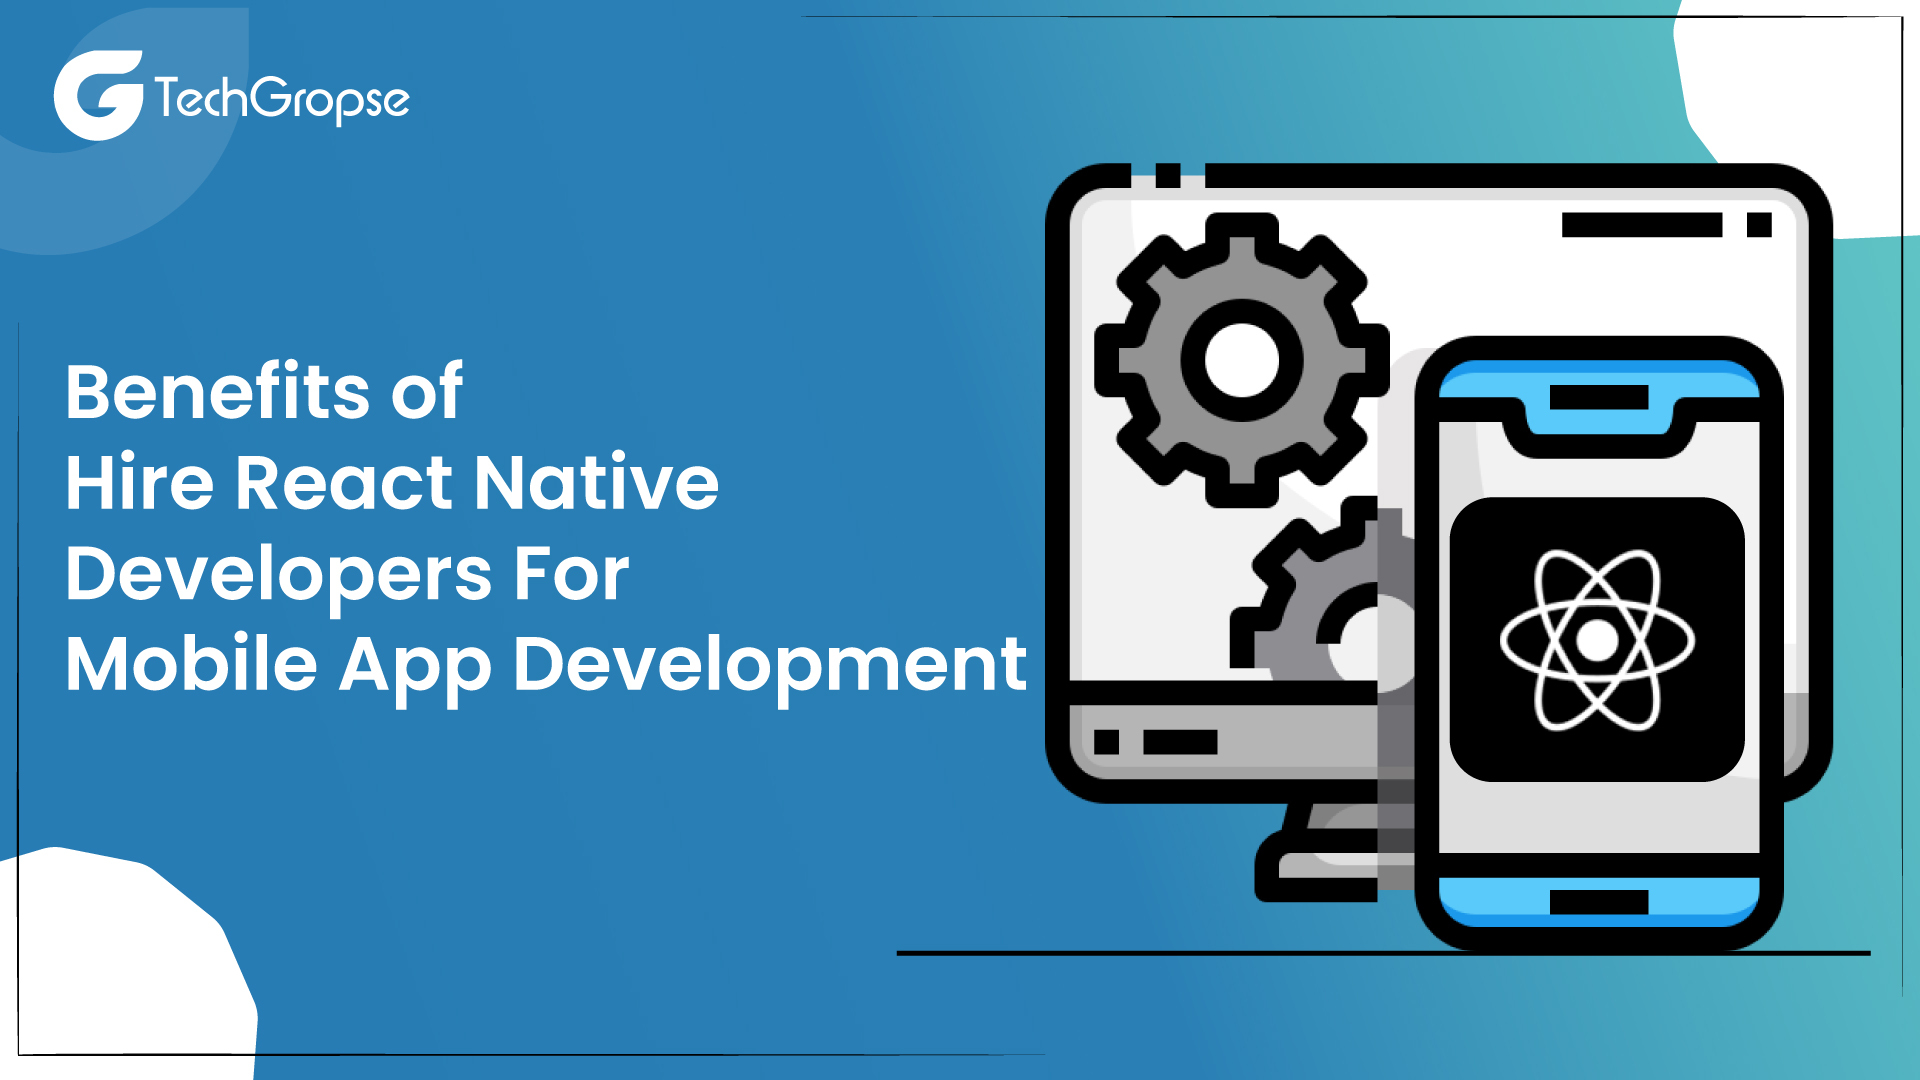 Benefits of Hire React Native Developers For Mobile App Development